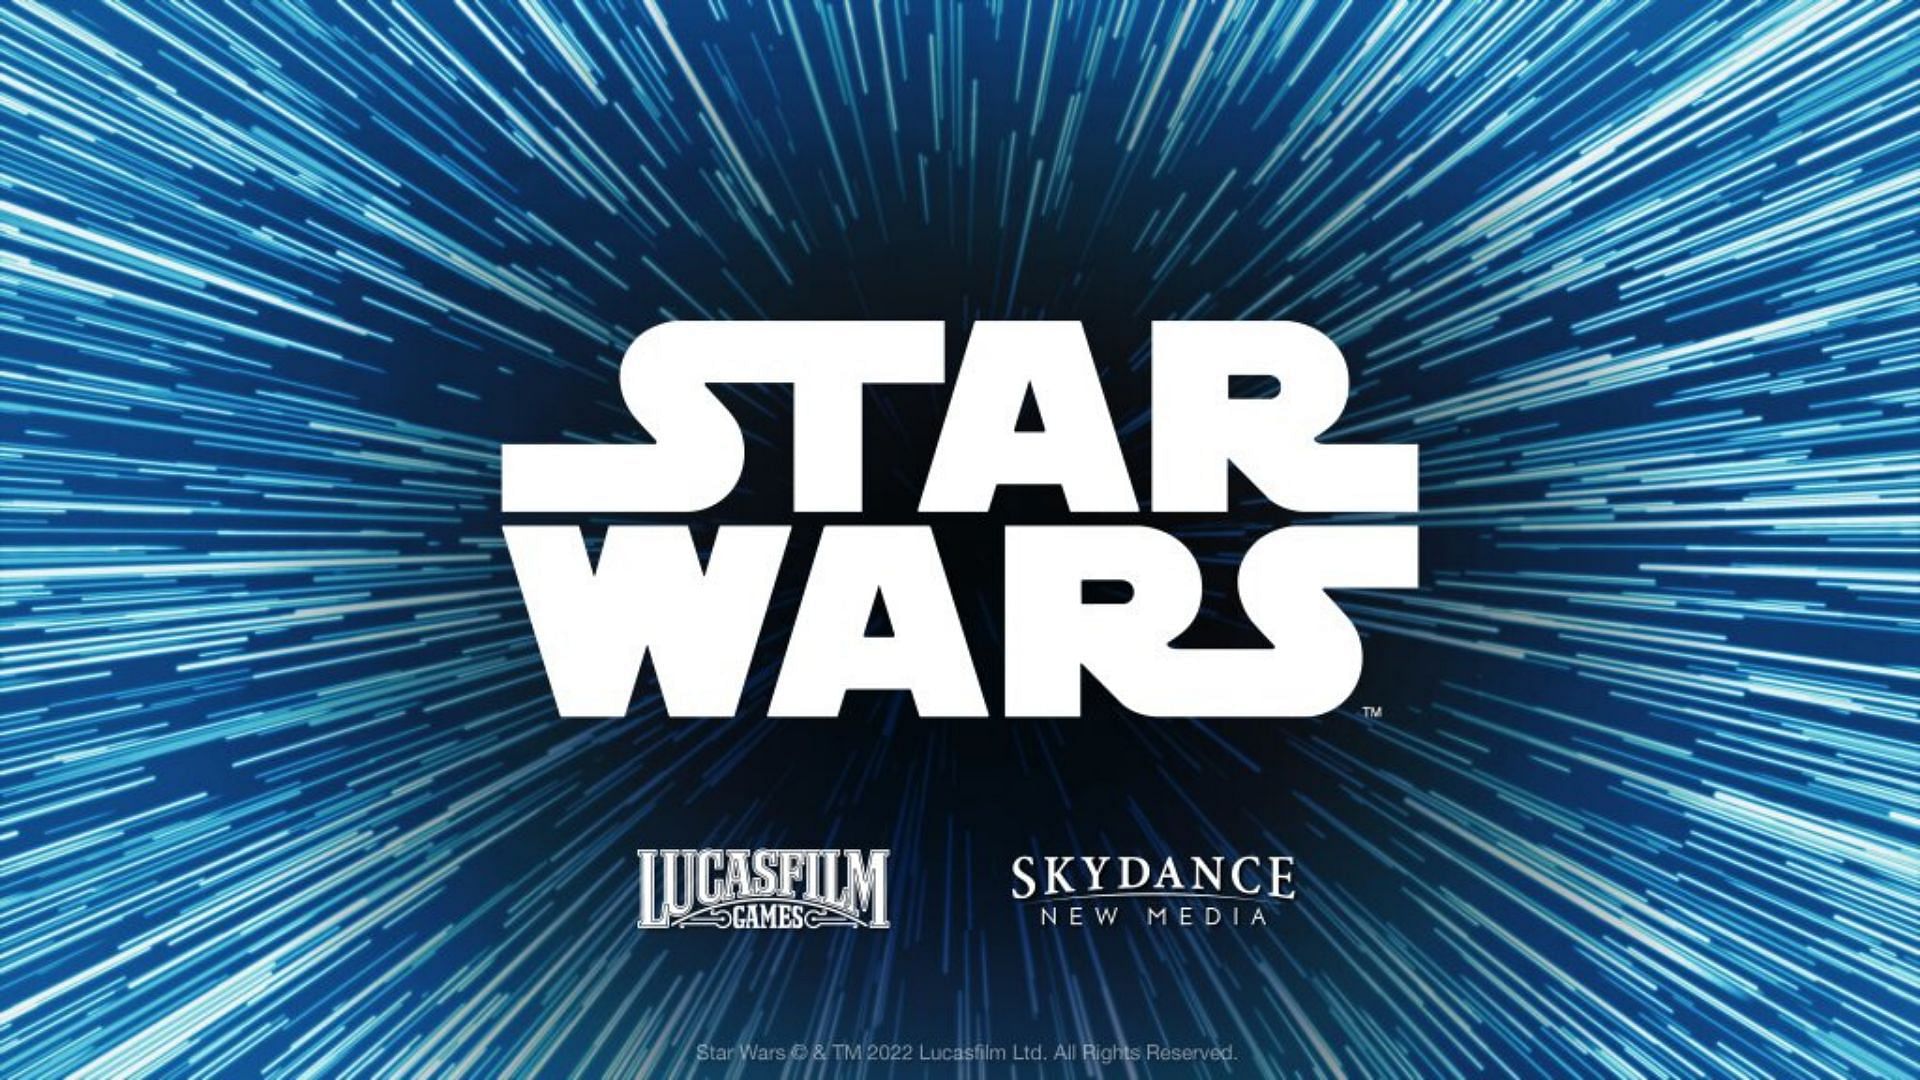 New Star Wars game in development by Skydance New Media (Image via Lucasfilm)